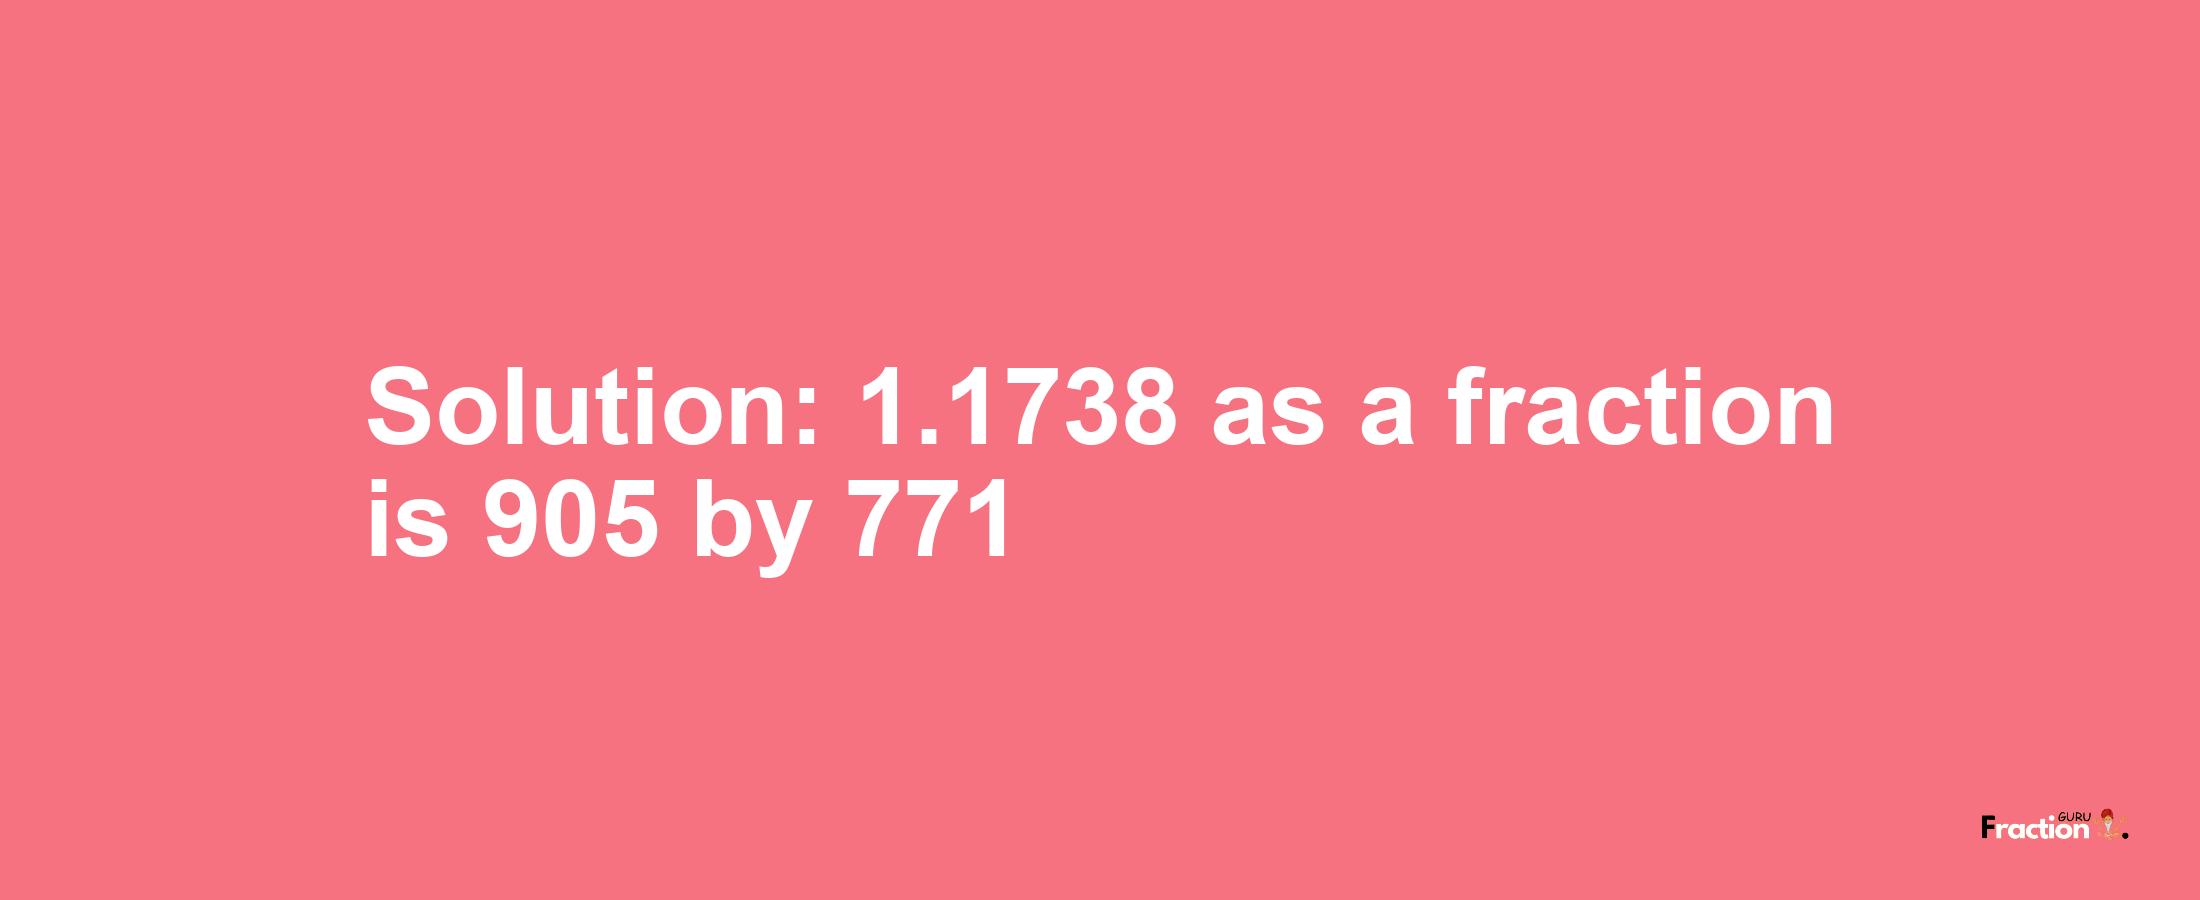 Solution:1.1738 as a fraction is 905/771